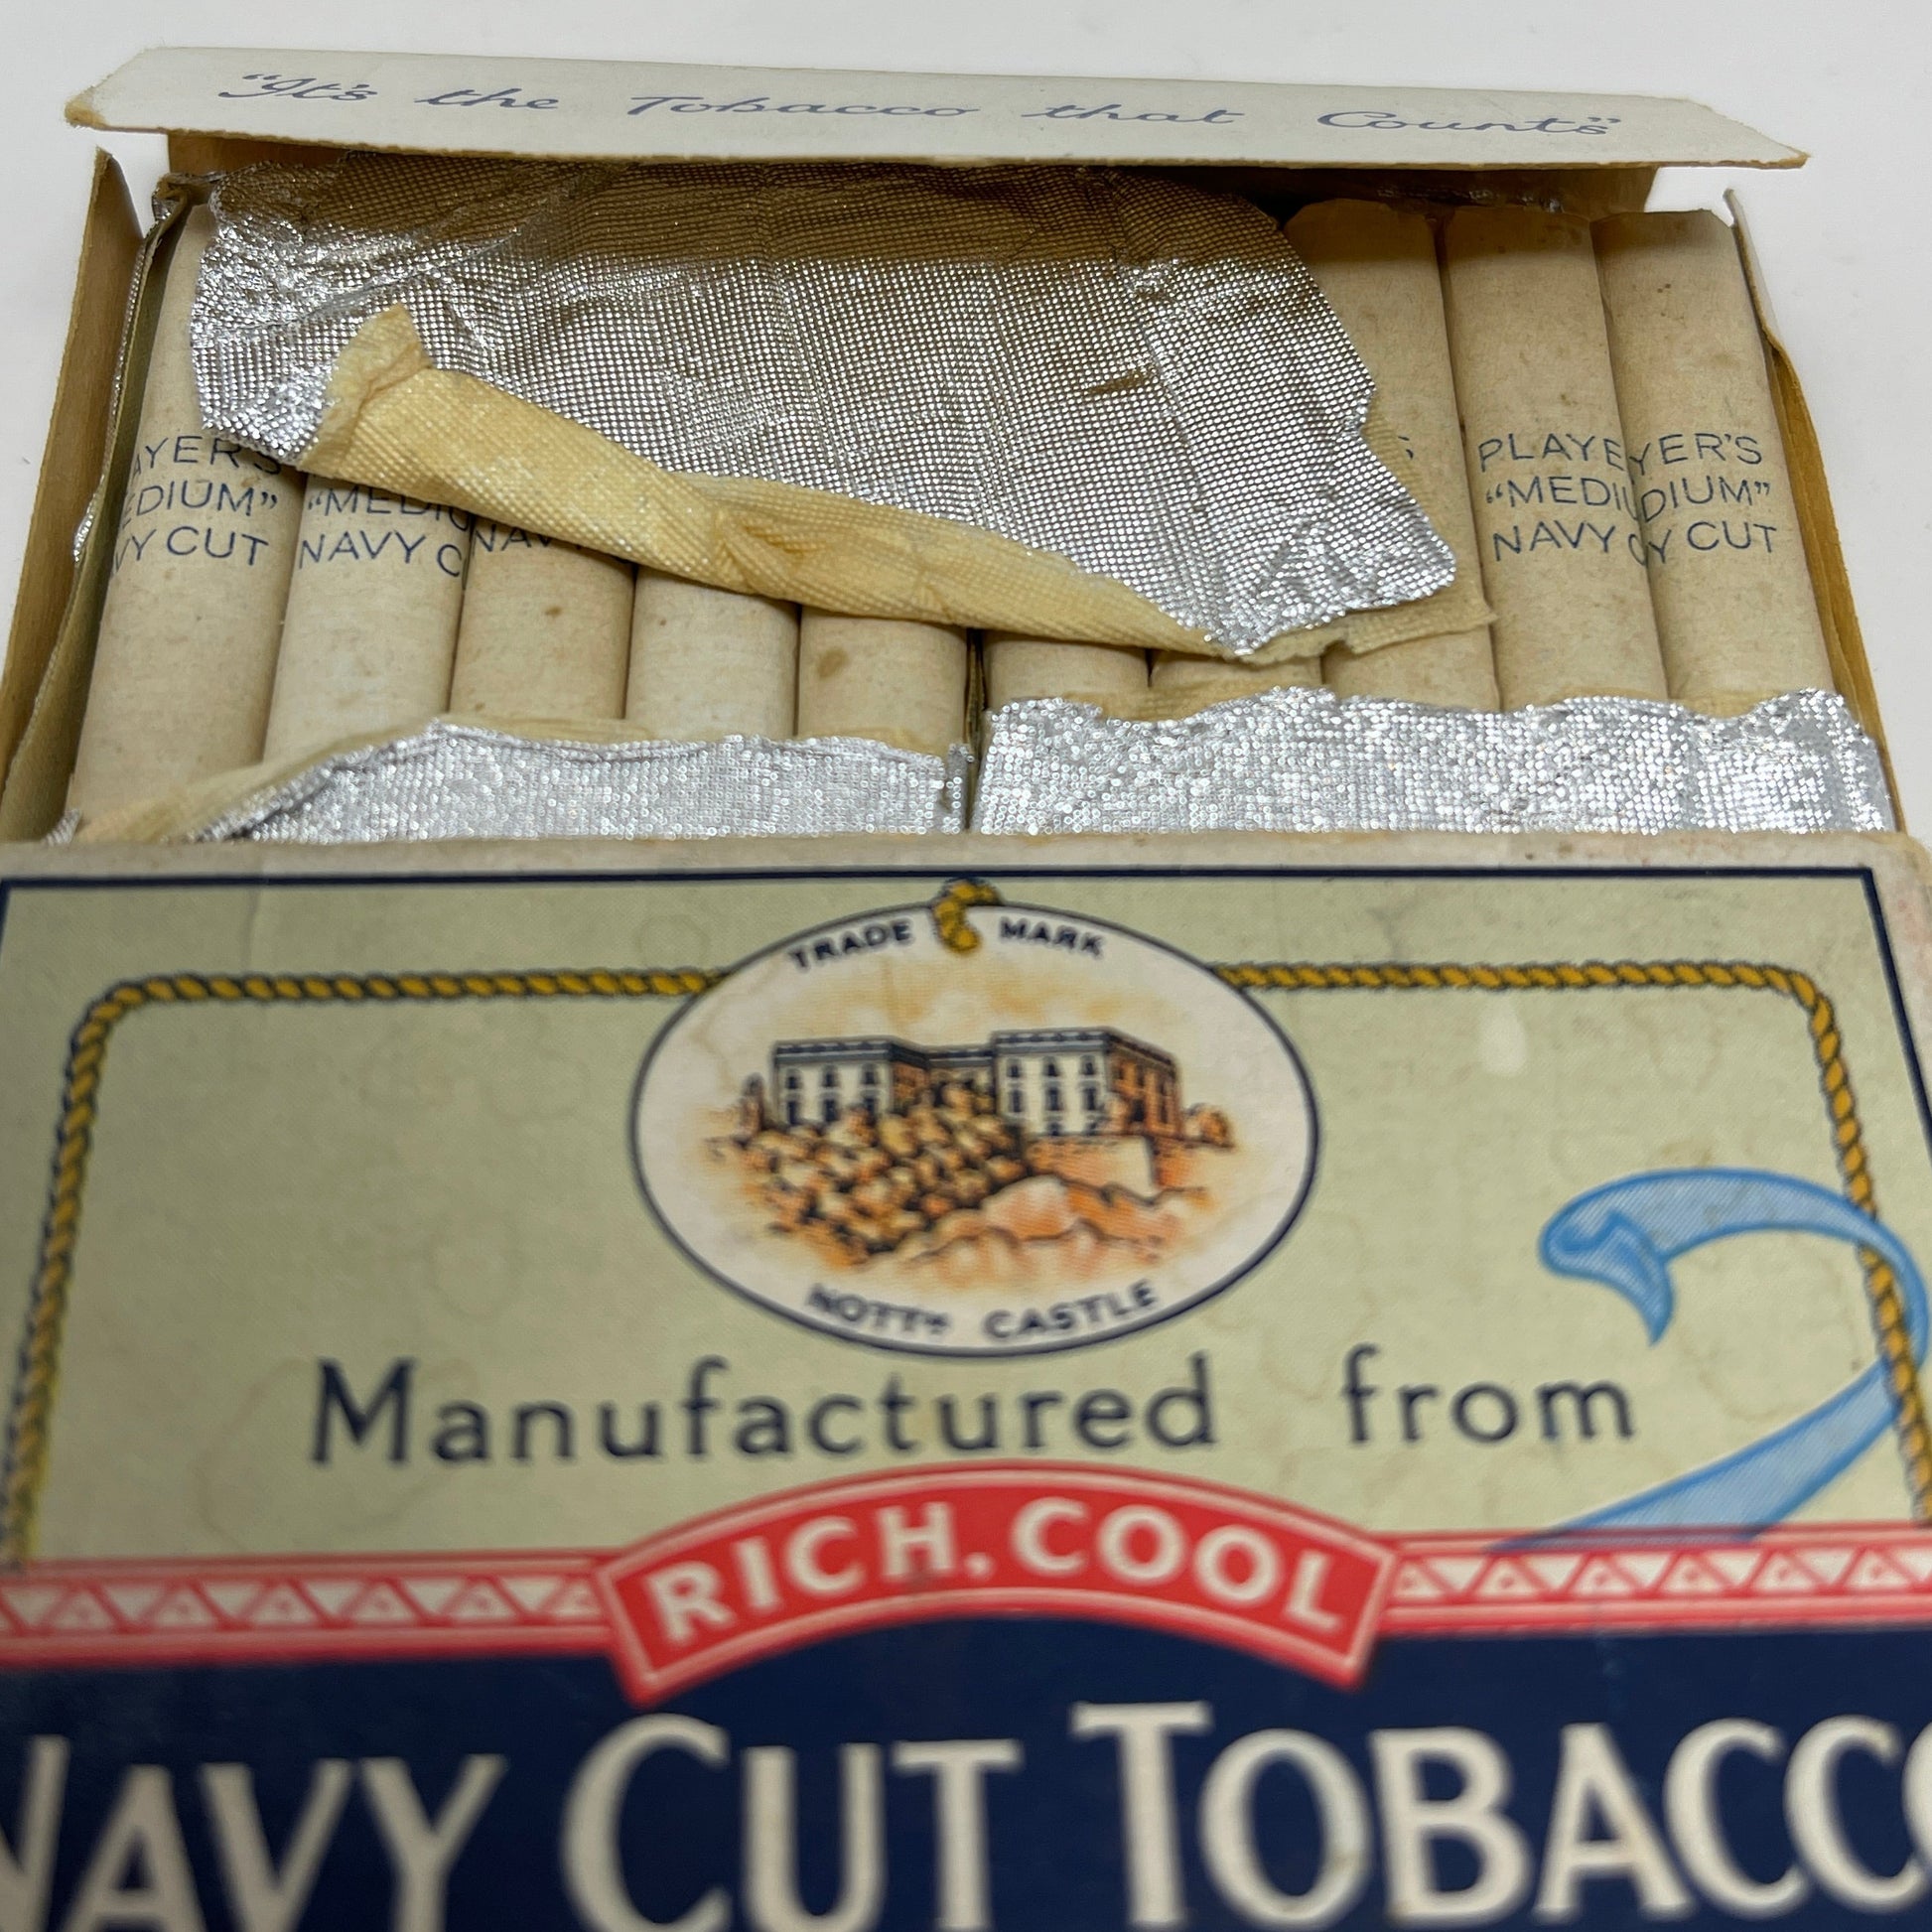 A Packet of Navy Cut Cigarettes showing cigarettes inside box